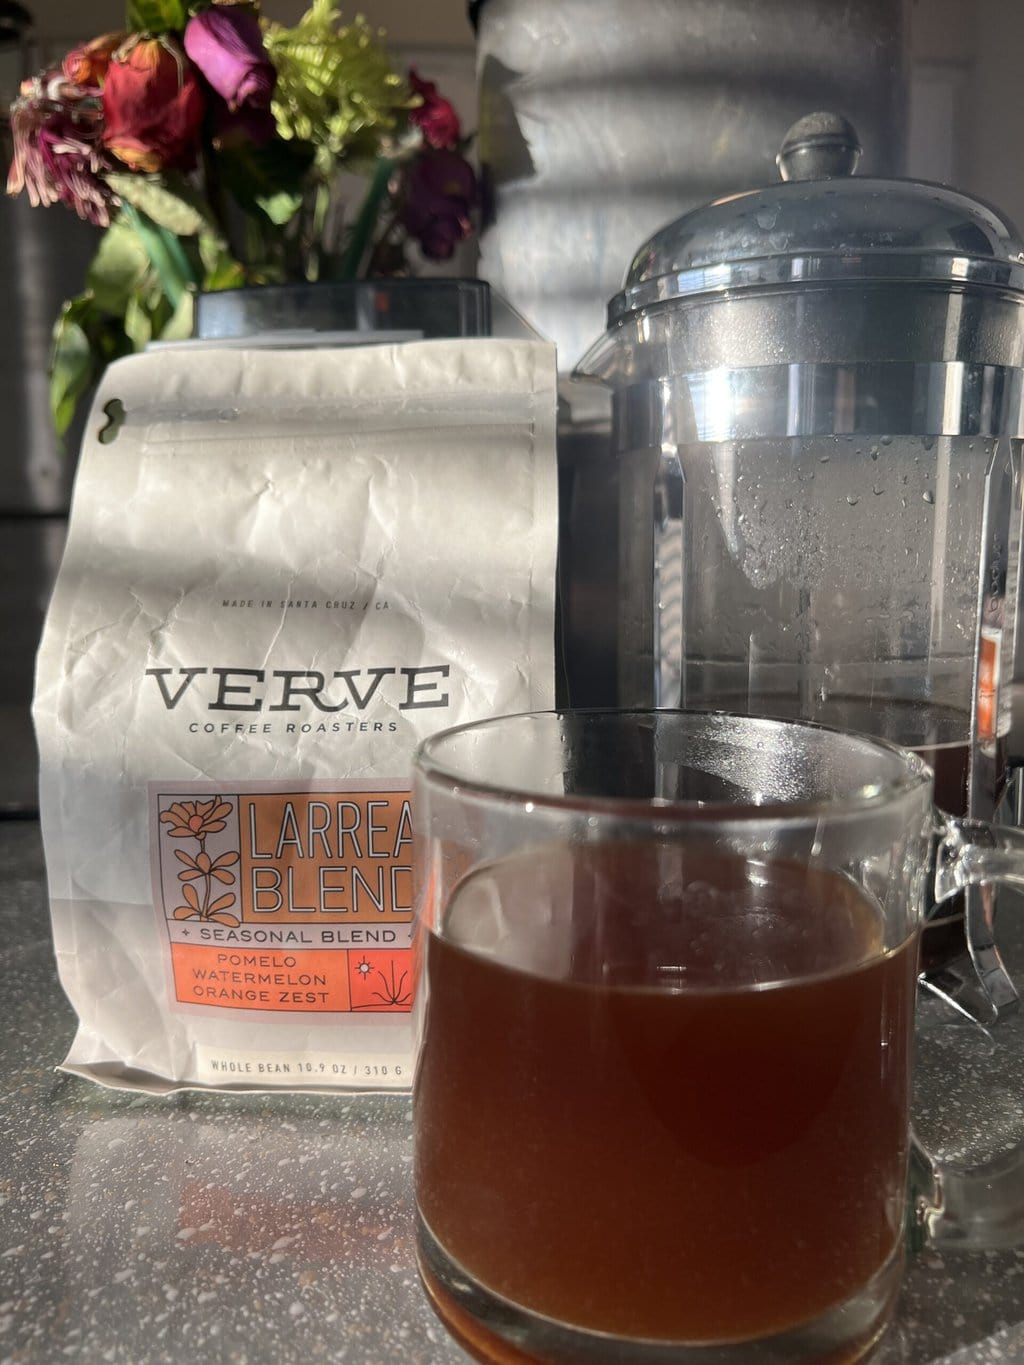 a glass of brewed coffee against the background of Verve Coffee packaging and a French press